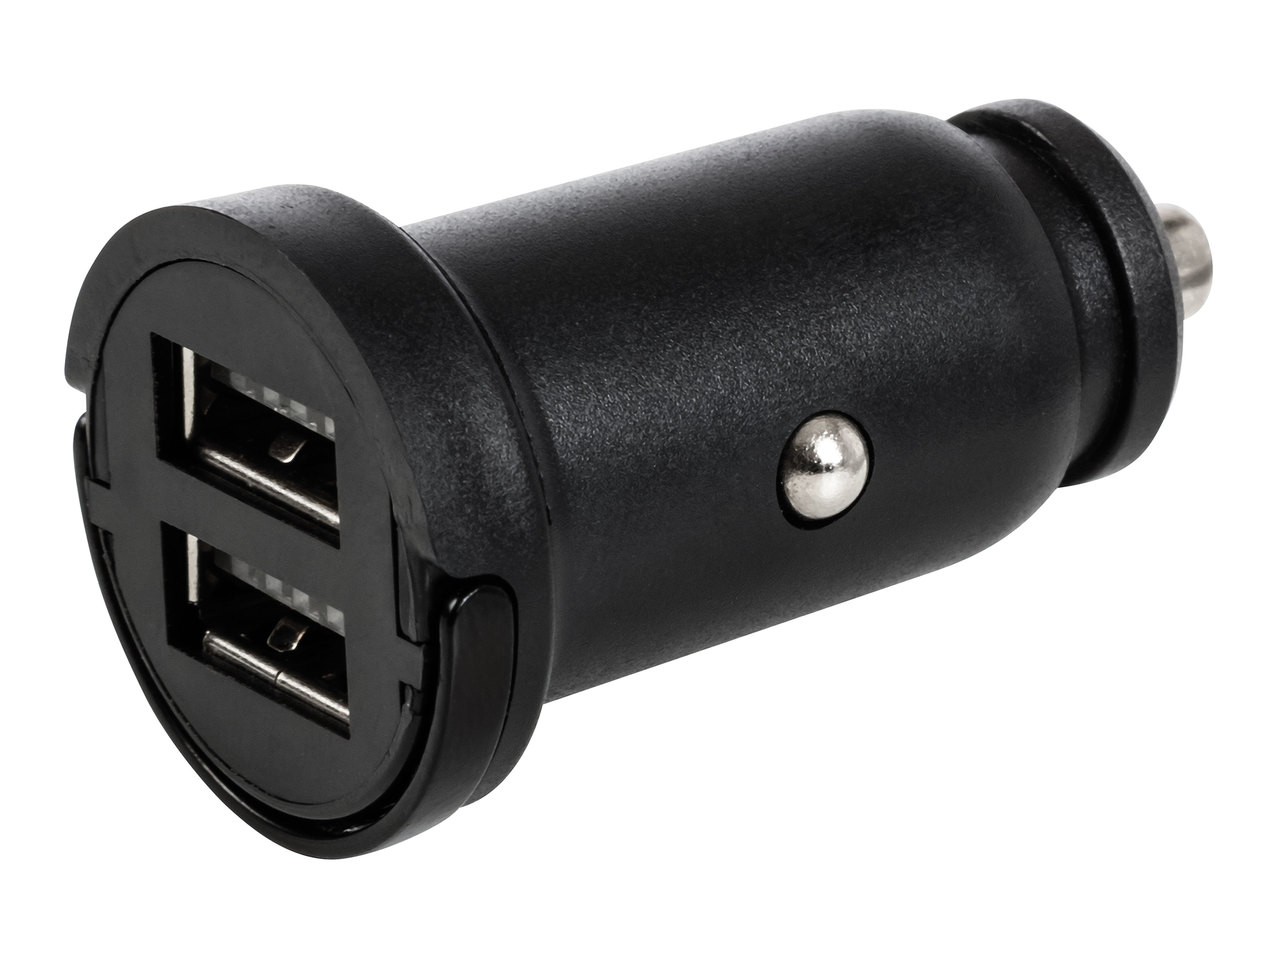 Silvercrest In-Car Charger1